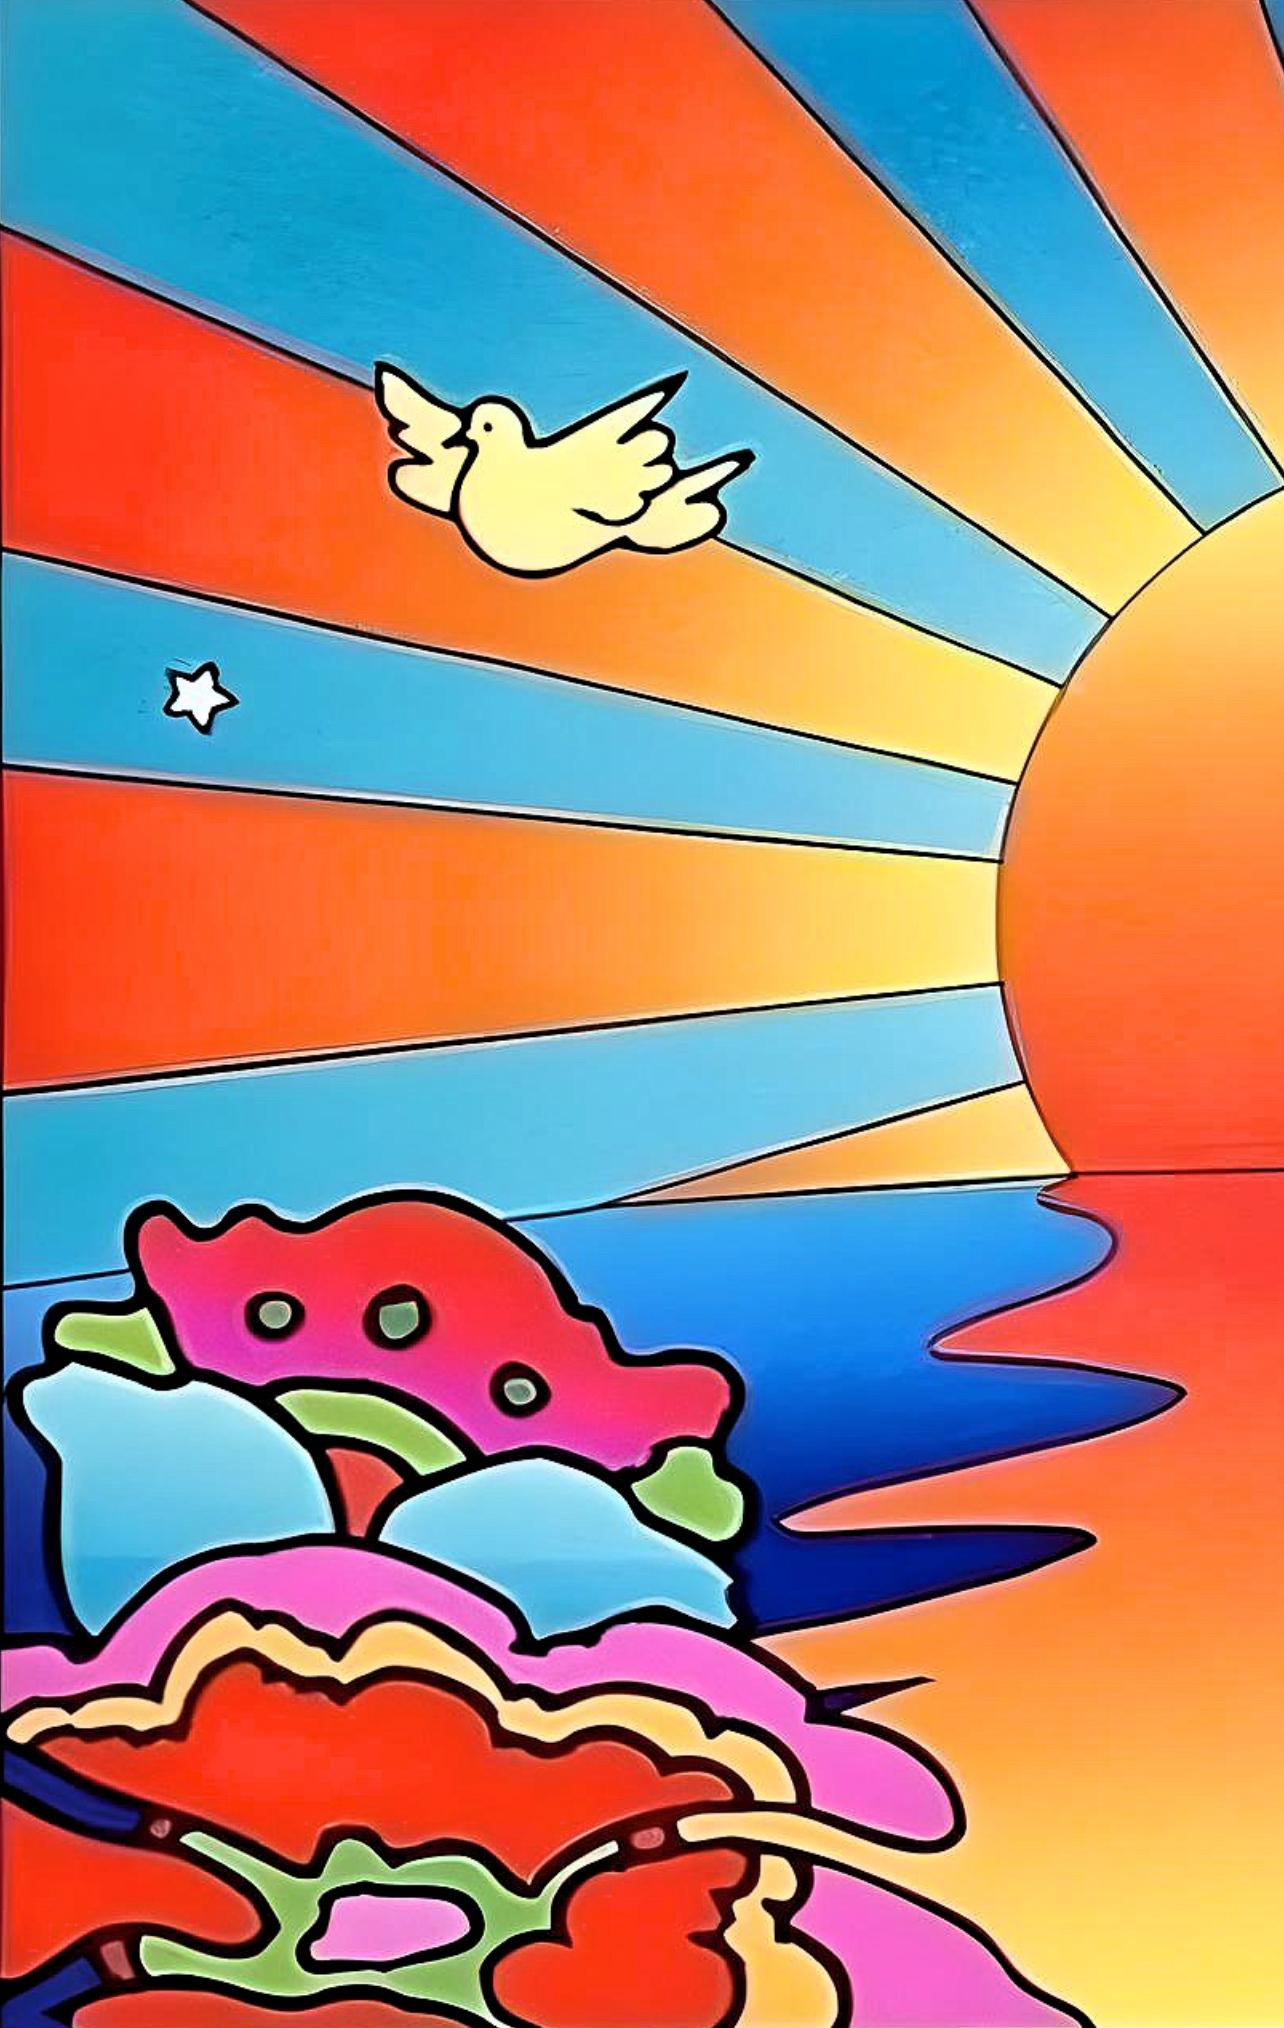 protect our Children Ver. II, Peter Max im Angebot 2